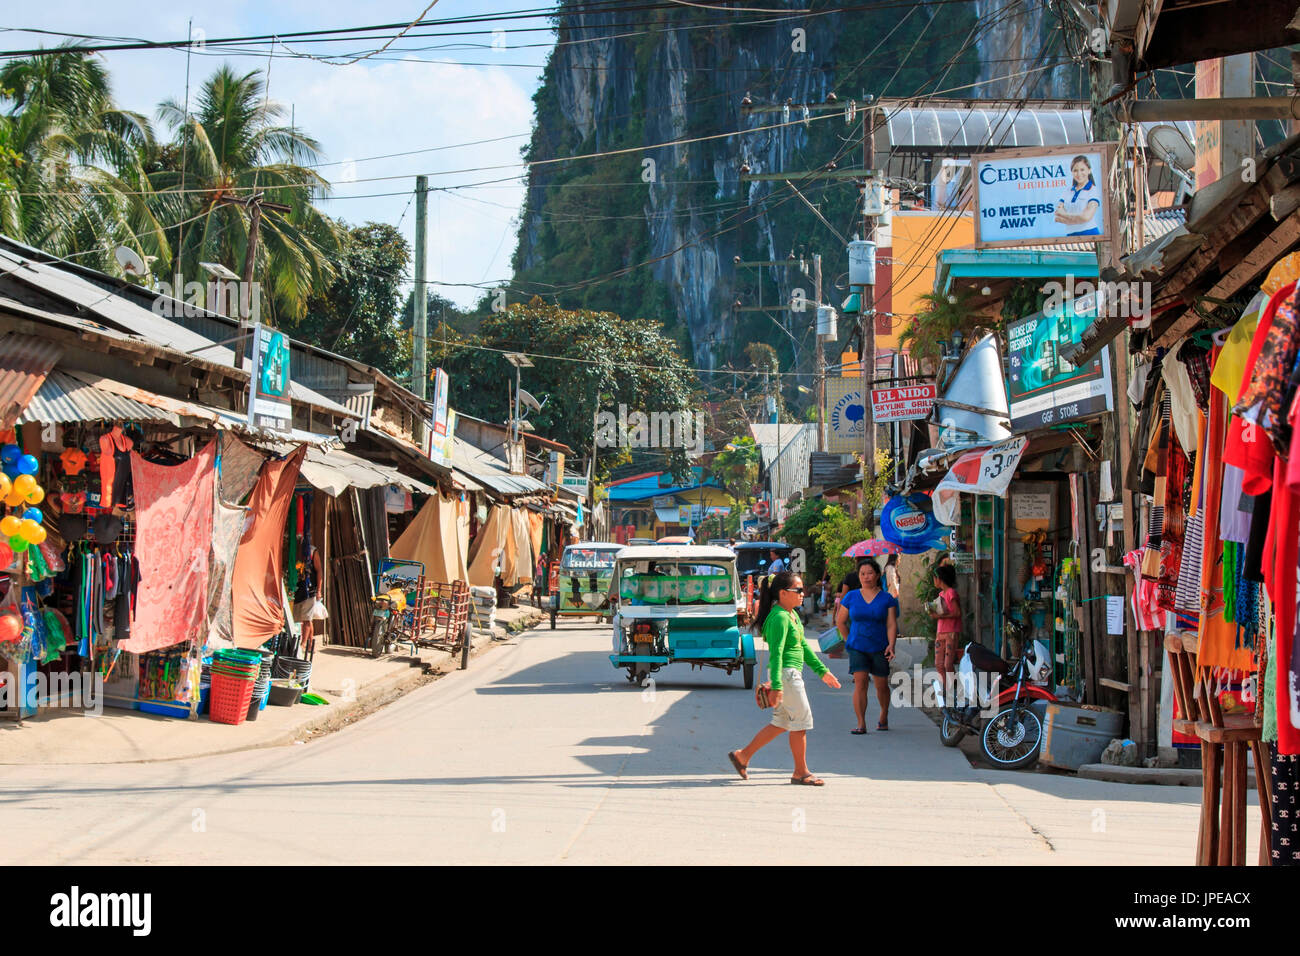 El Nido, Palawan, Philippines. Main street of El Nido in Palawan, one of the main islands in the Philippines. Tricycles and local people on foreground. Stock Photo